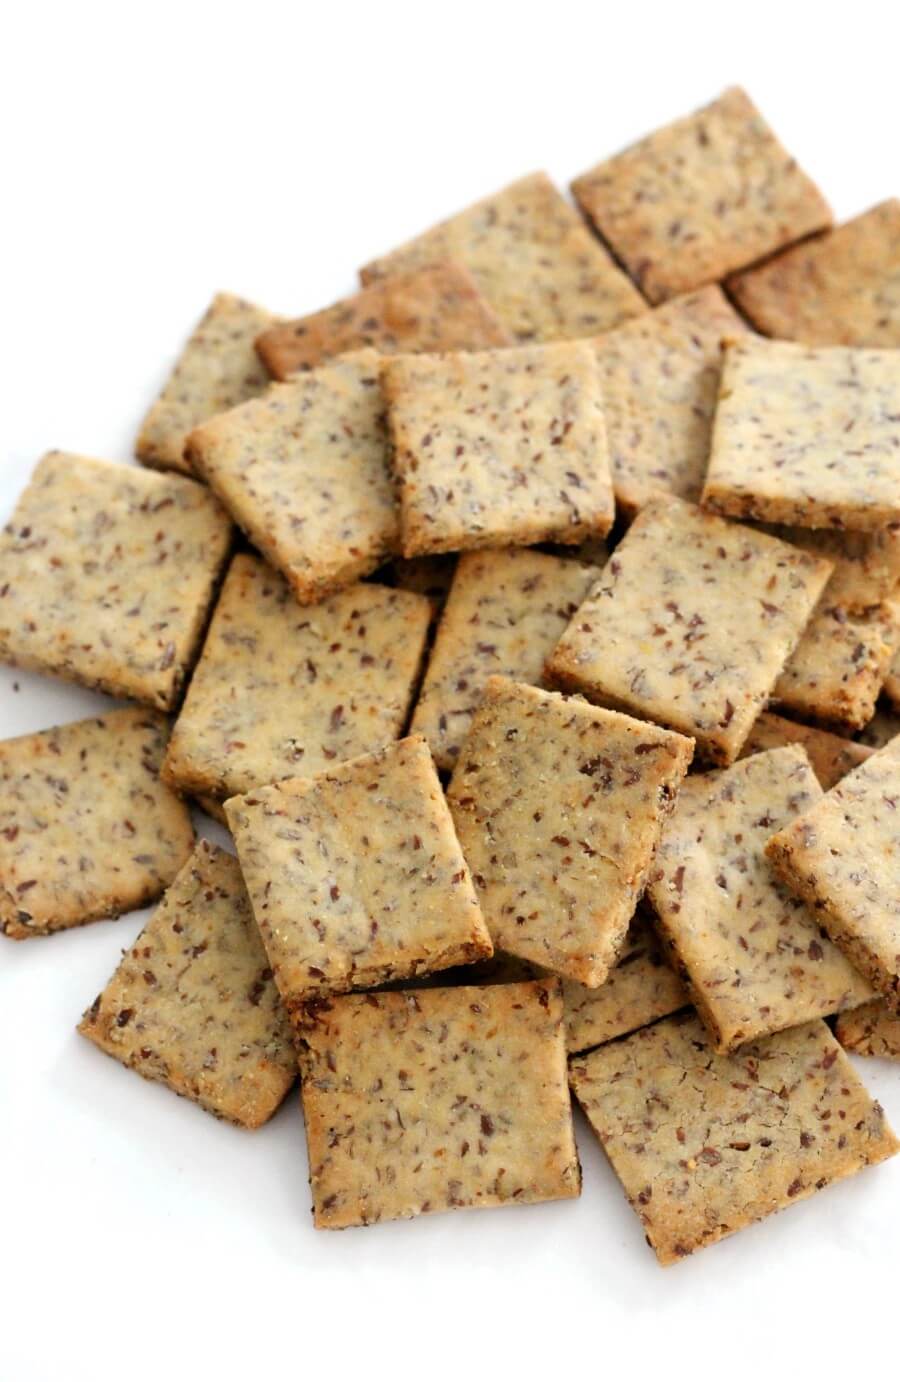 large pile of gluten-free wheat thins crackers